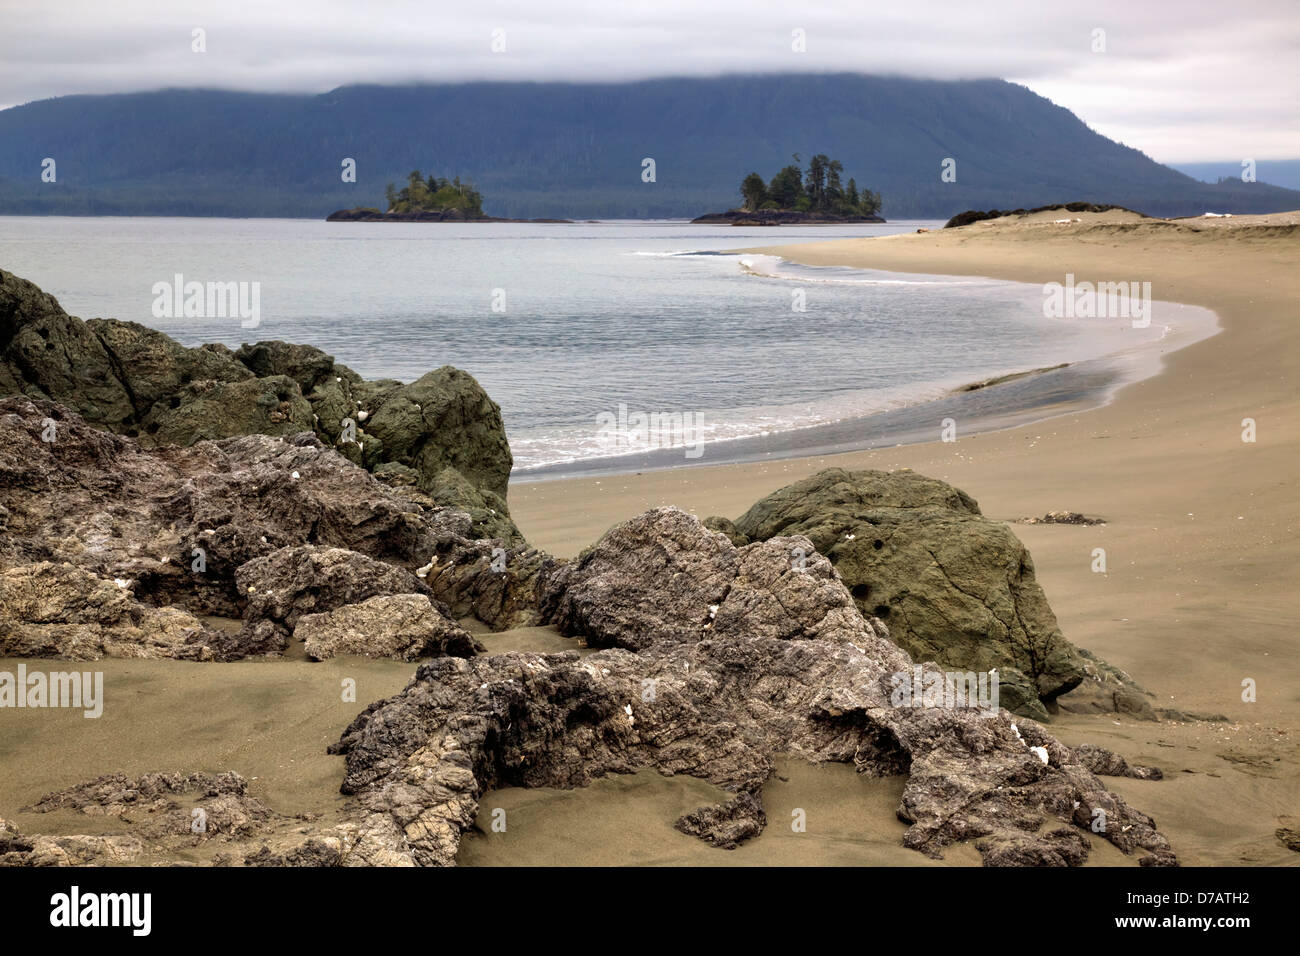 Whaler Islet With View Towards Flores Island; Vancouver Island British Columbia Canada Stock Photo